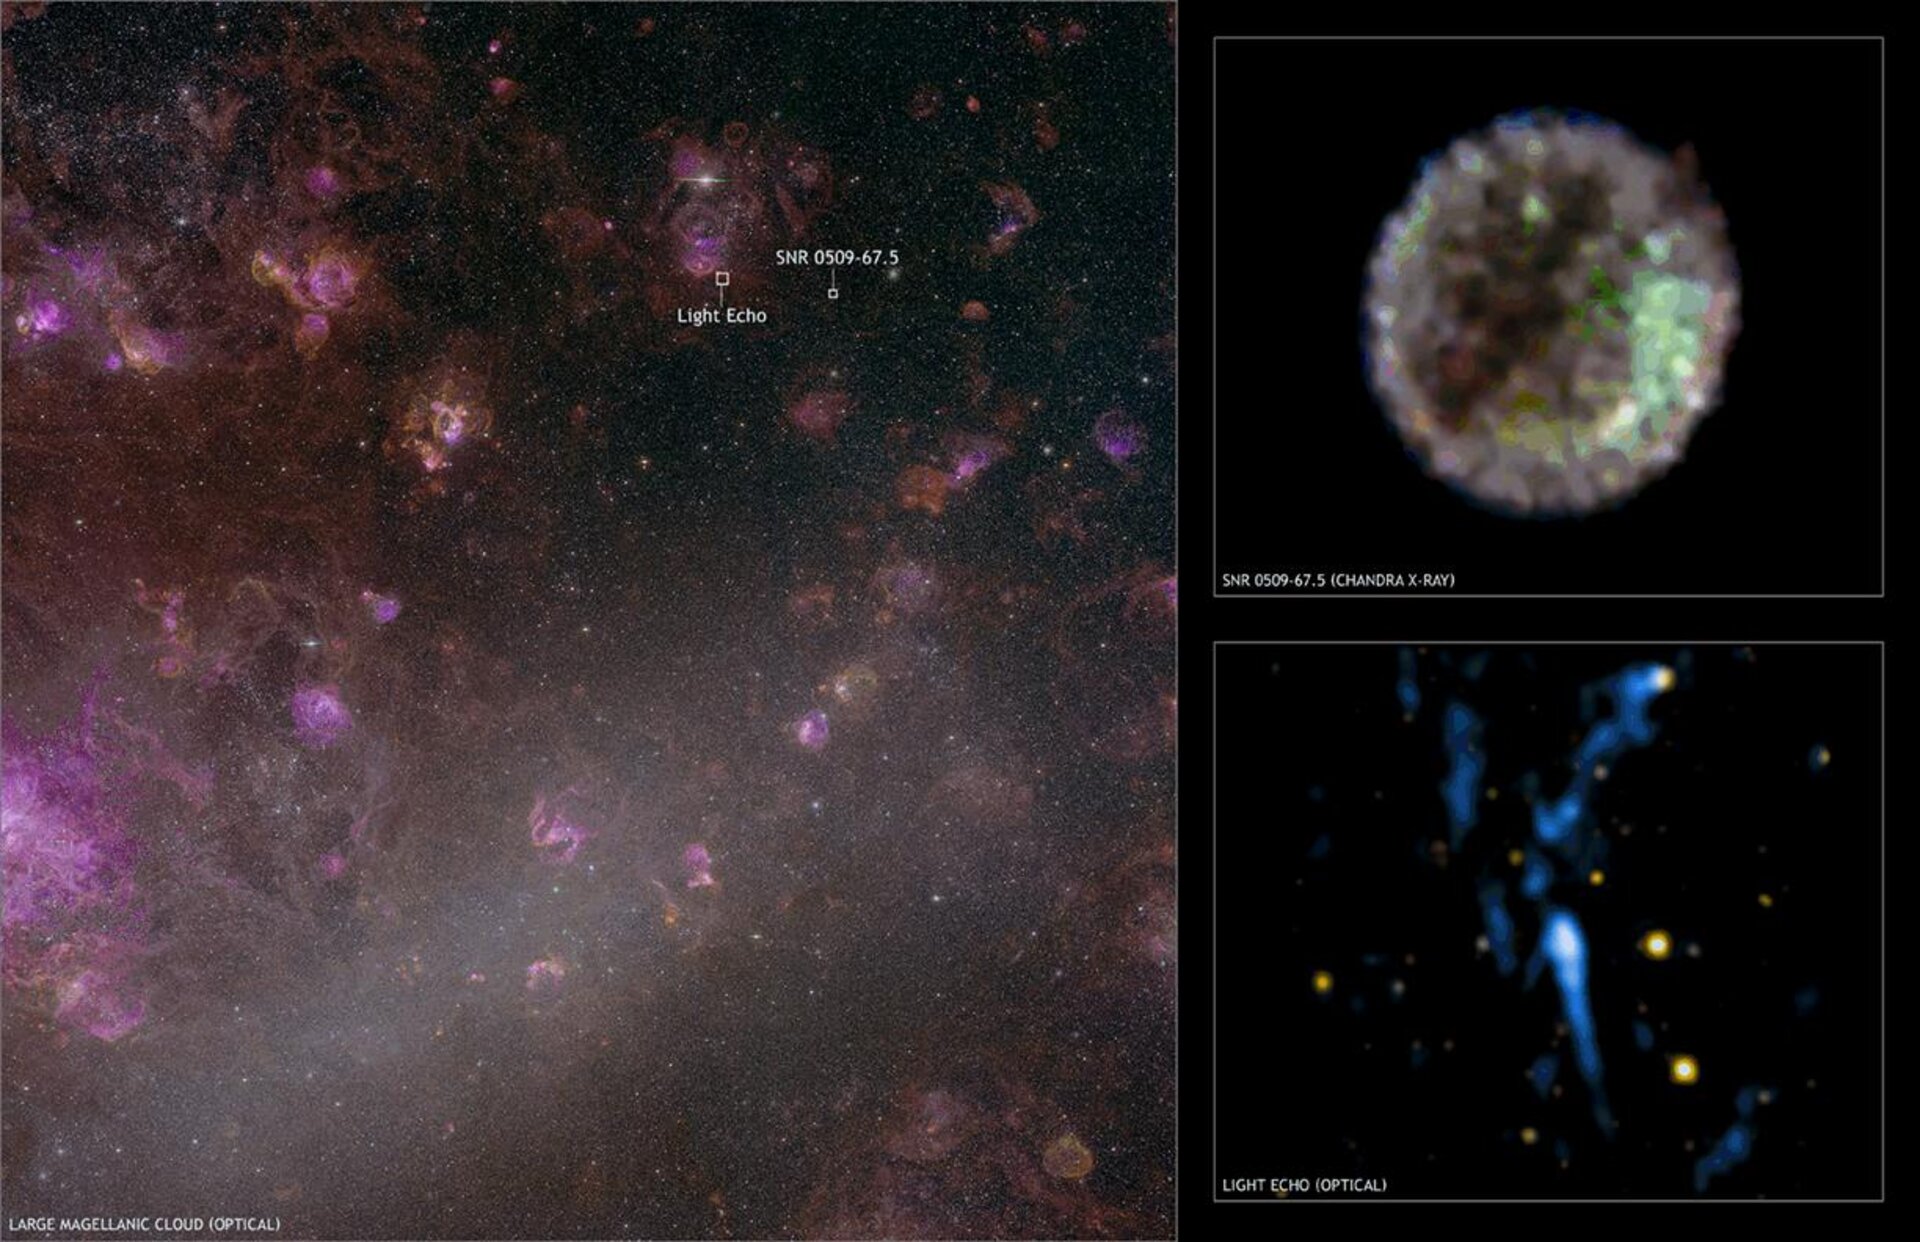 X-ray and optical images of aftermath of supernova